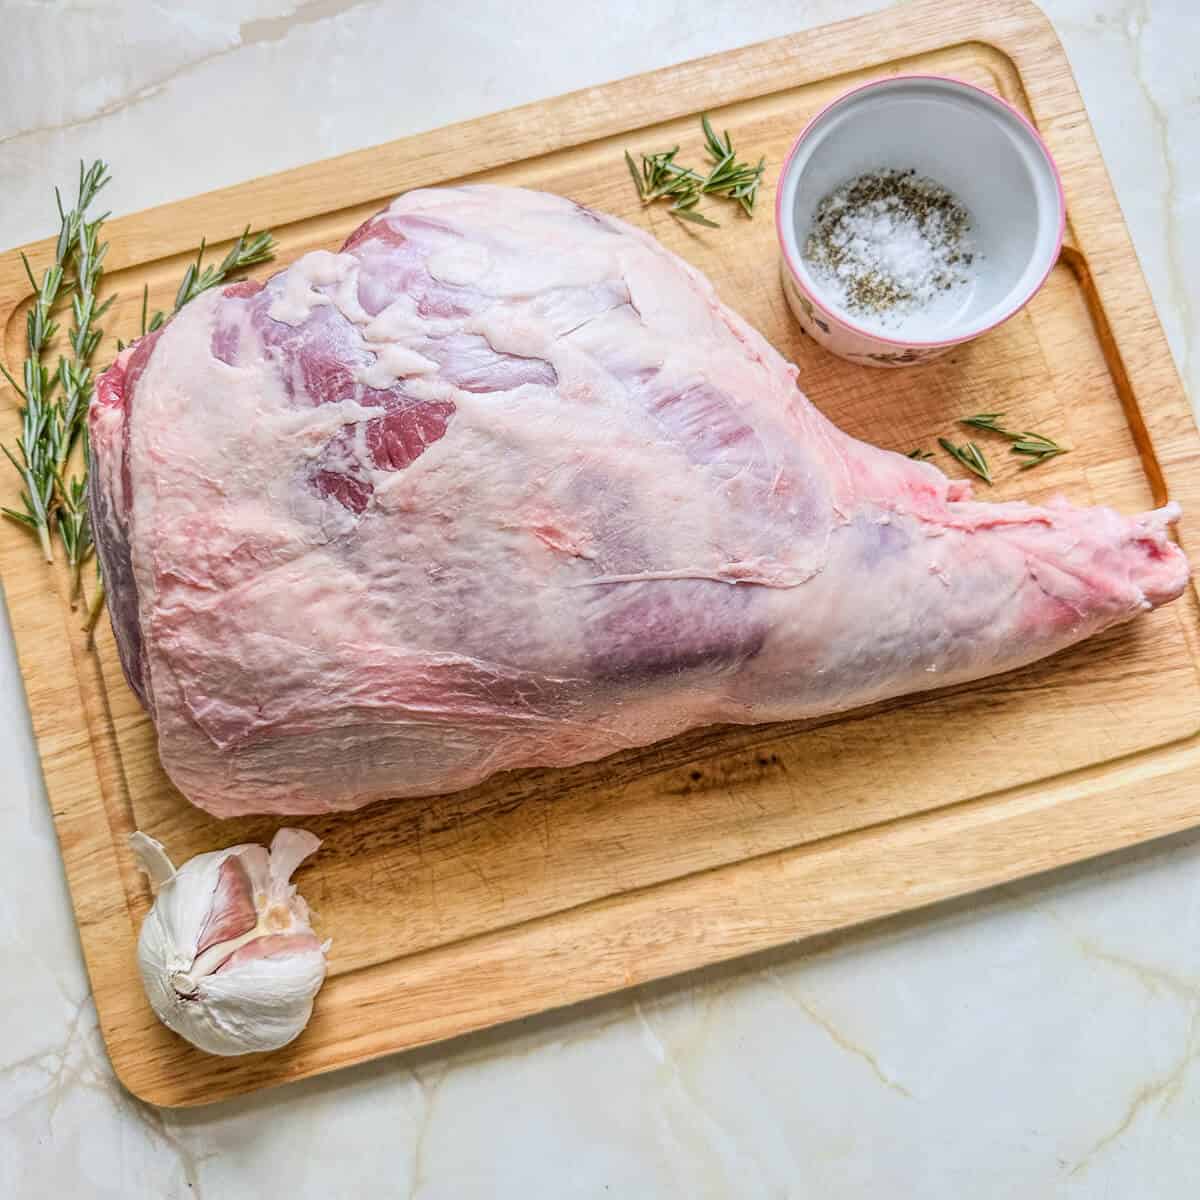 A raw leg of lamb on a wooden chopping board next to some sprigs of rosemary, a pot of salt and pepper, and garlic cloves. 